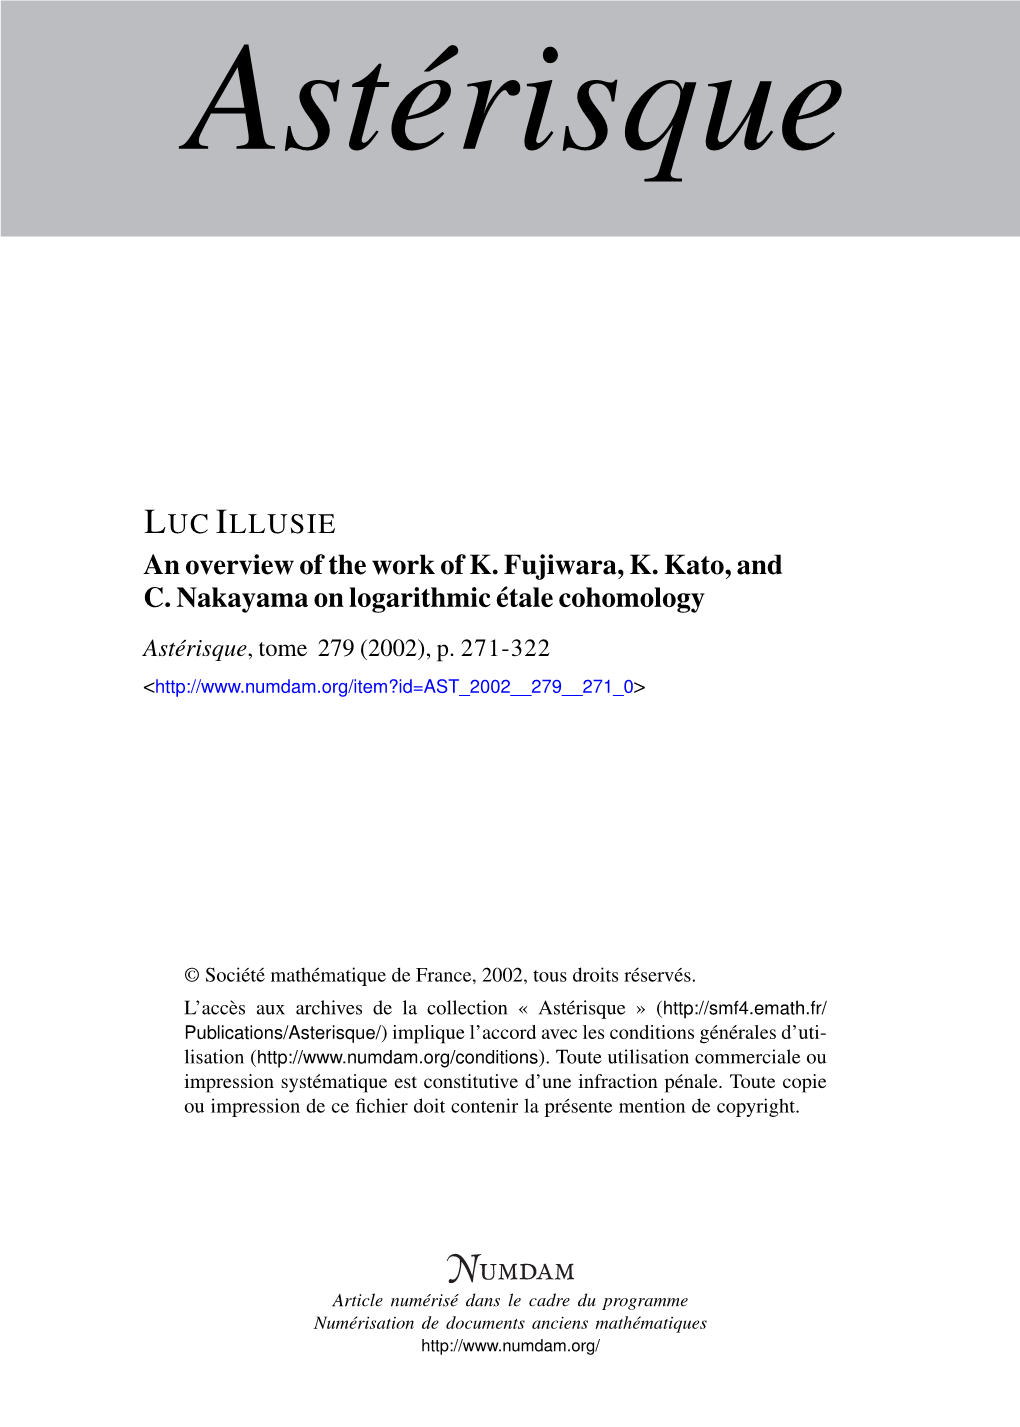 An Overview of the Work of K. Fujiwara, K. Kato, and C. Nakayama on Logarithmic Étale Cohomology Astérisque, Tome 279 (2002), P